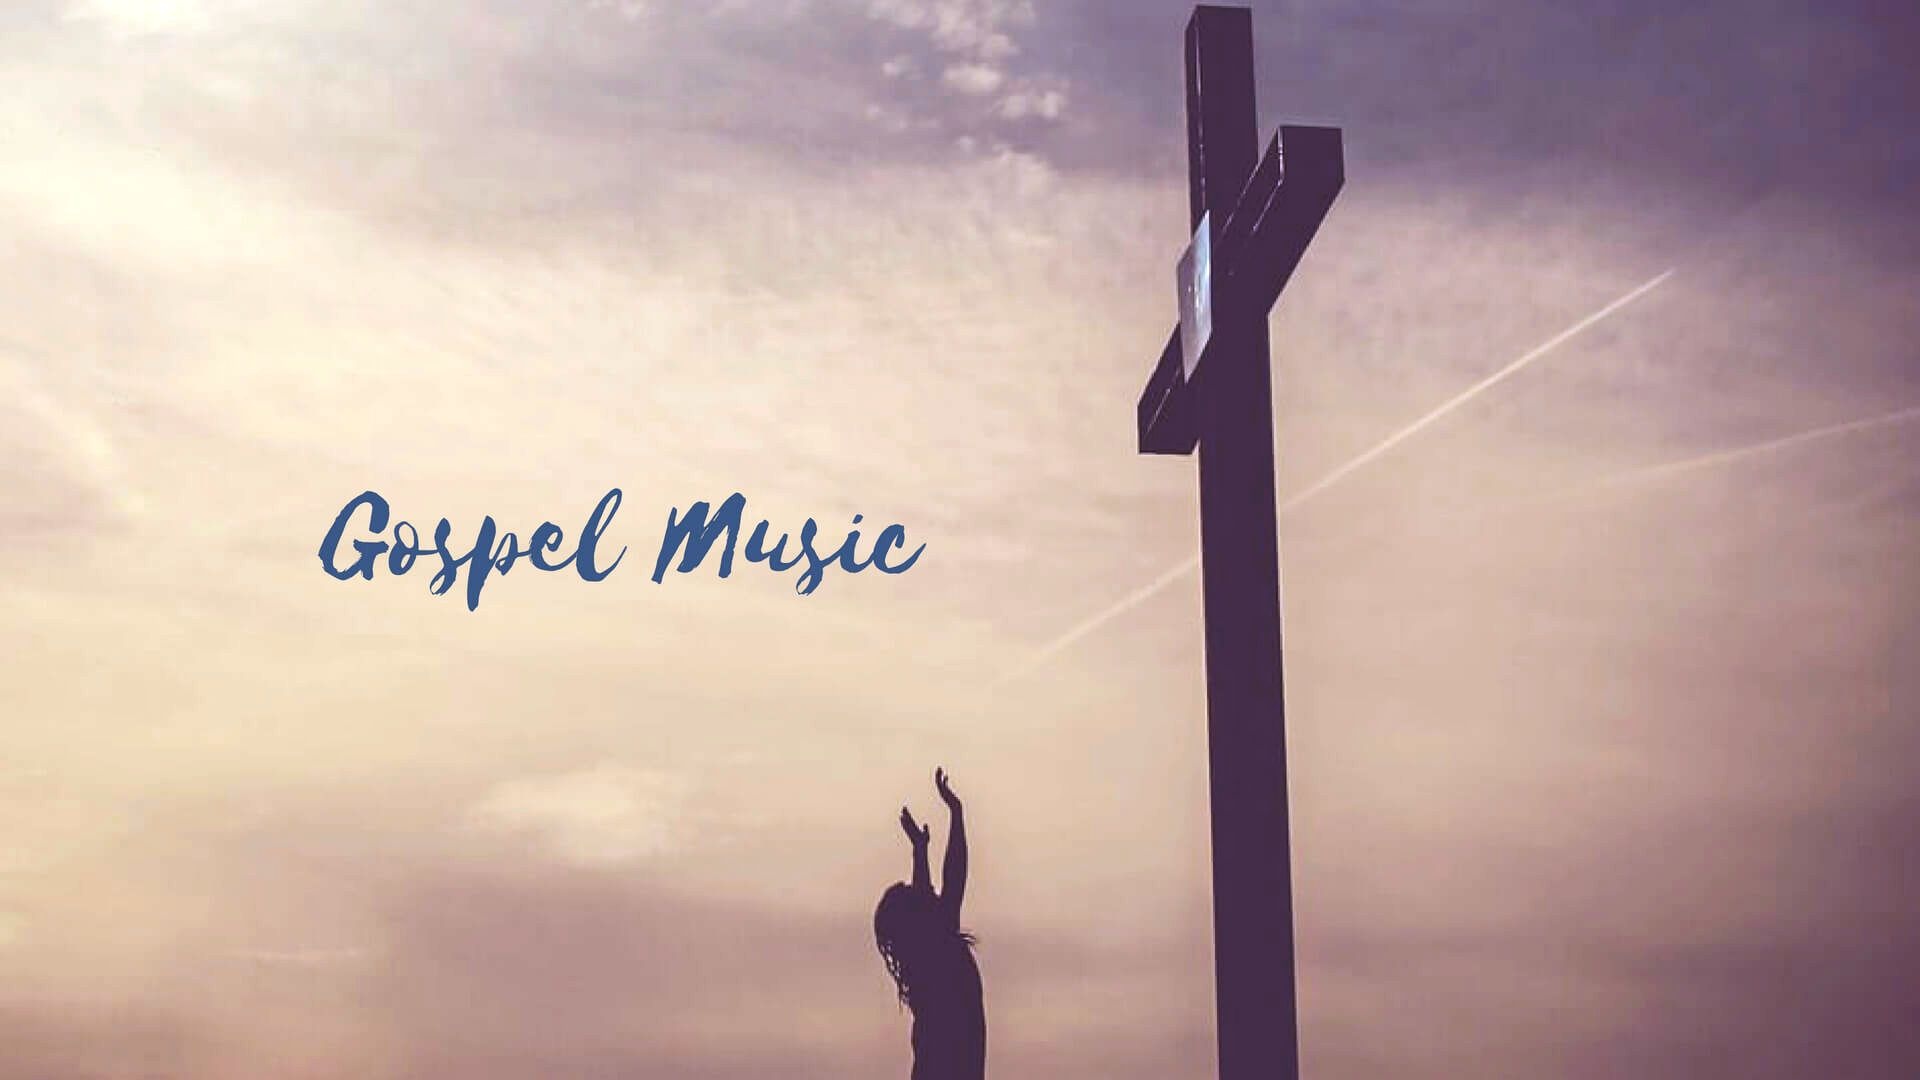 Gospel Music: Songs with a prophetic message, Holy and pure music, Contemporary Christian music. 1920x1080 Full HD Wallpaper.